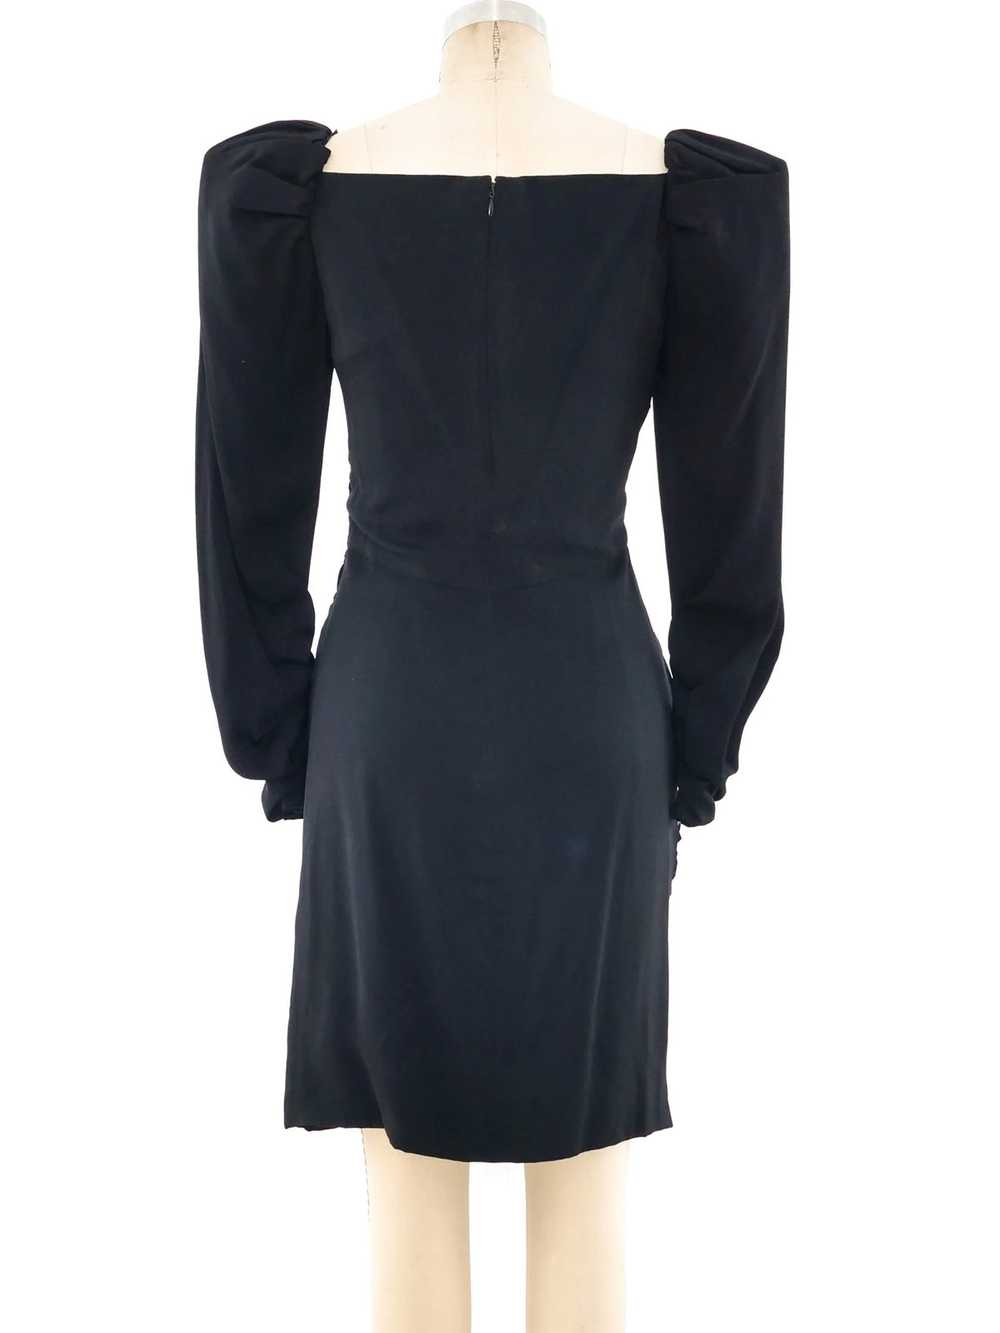 Arnold Scaasi Ruched Crepe Dress - image 4